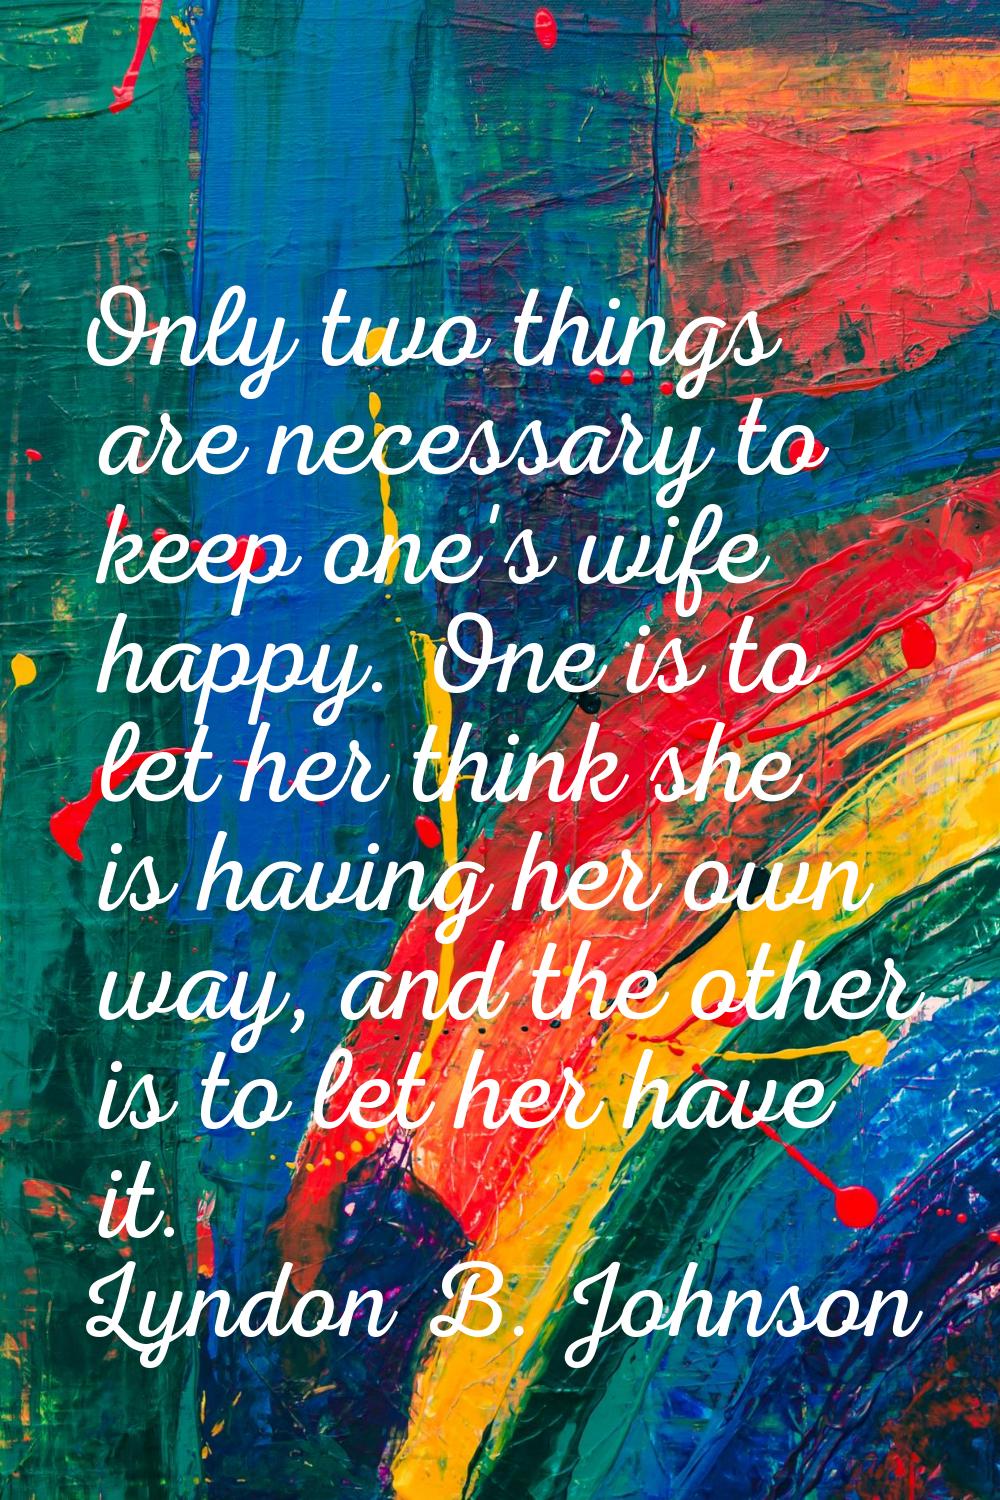 Only two things are necessary to keep one's wife happy. One is to let her think she is having her o